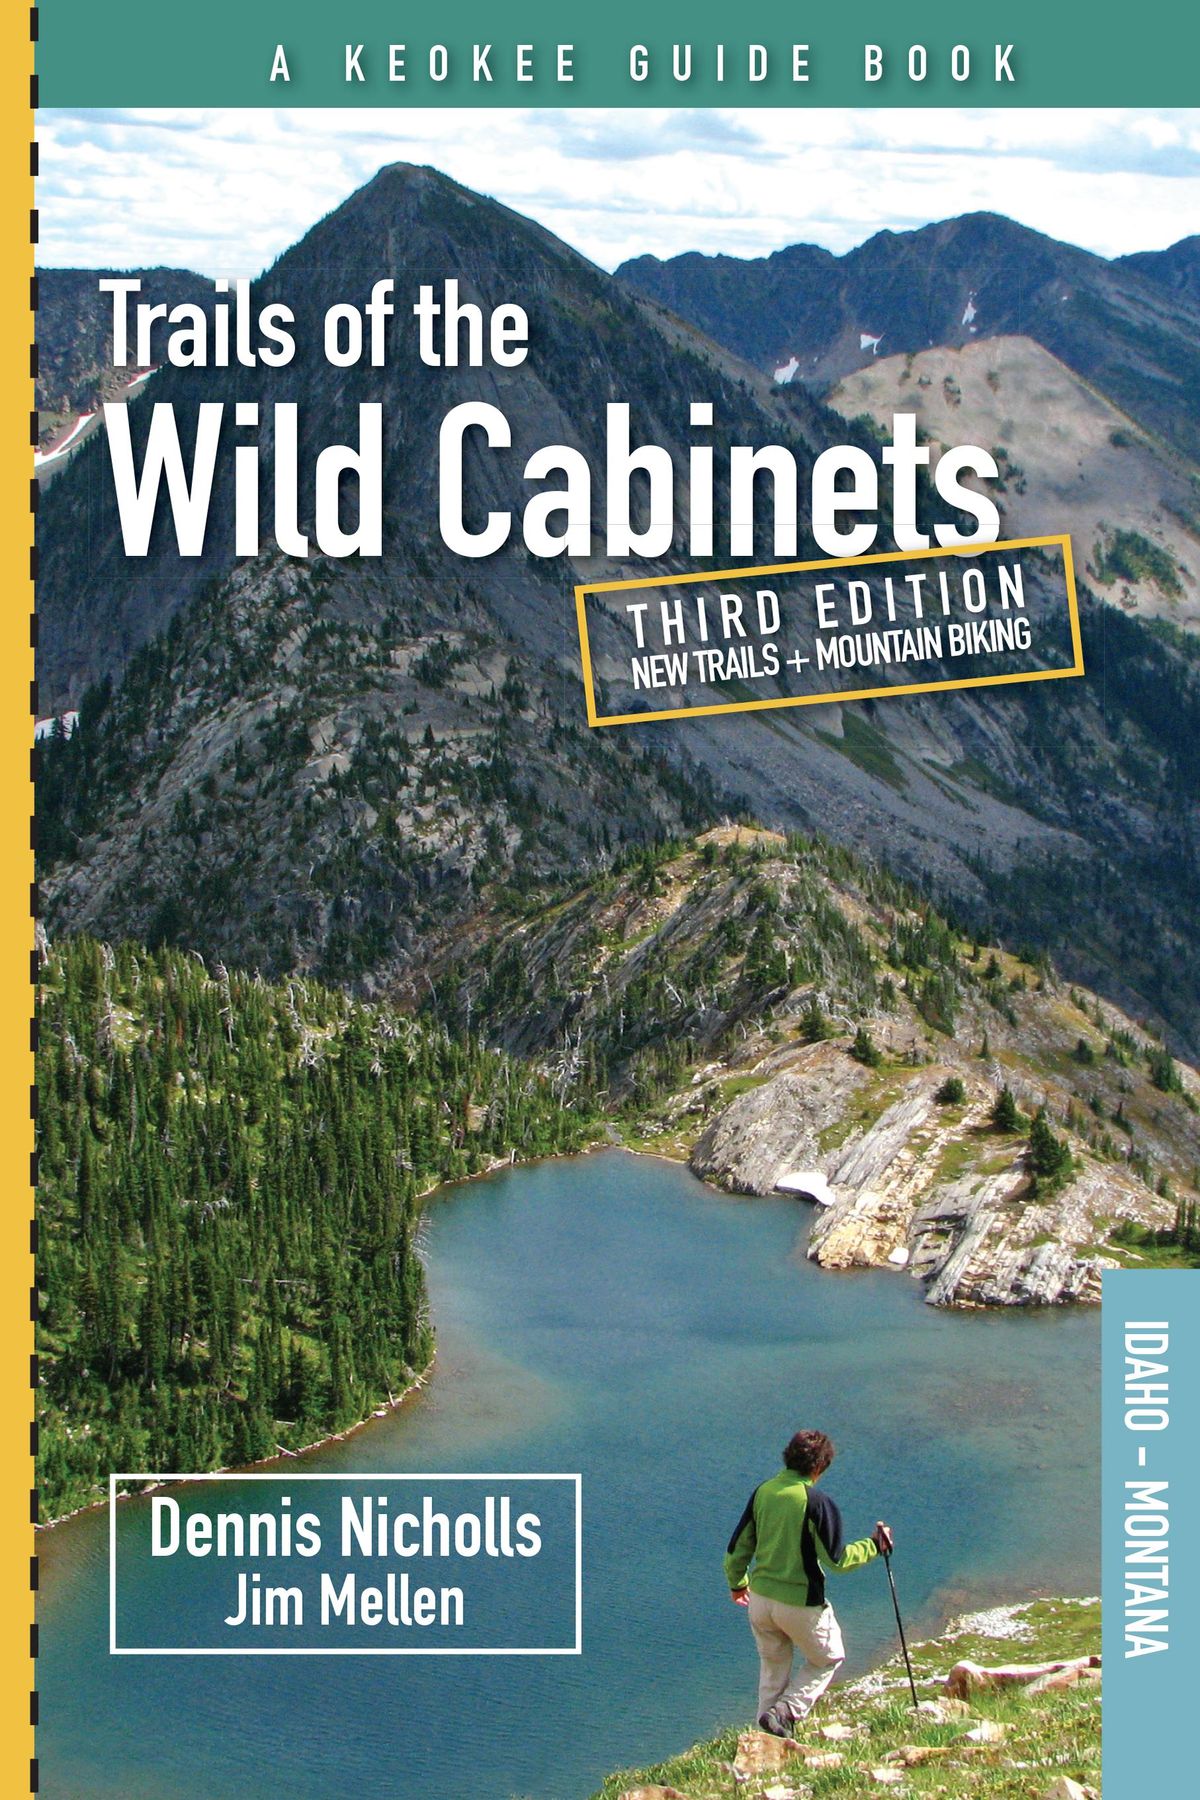 Trails of the Wild Cabinets is a guide to routes in northwestern Montana and North Idaho.